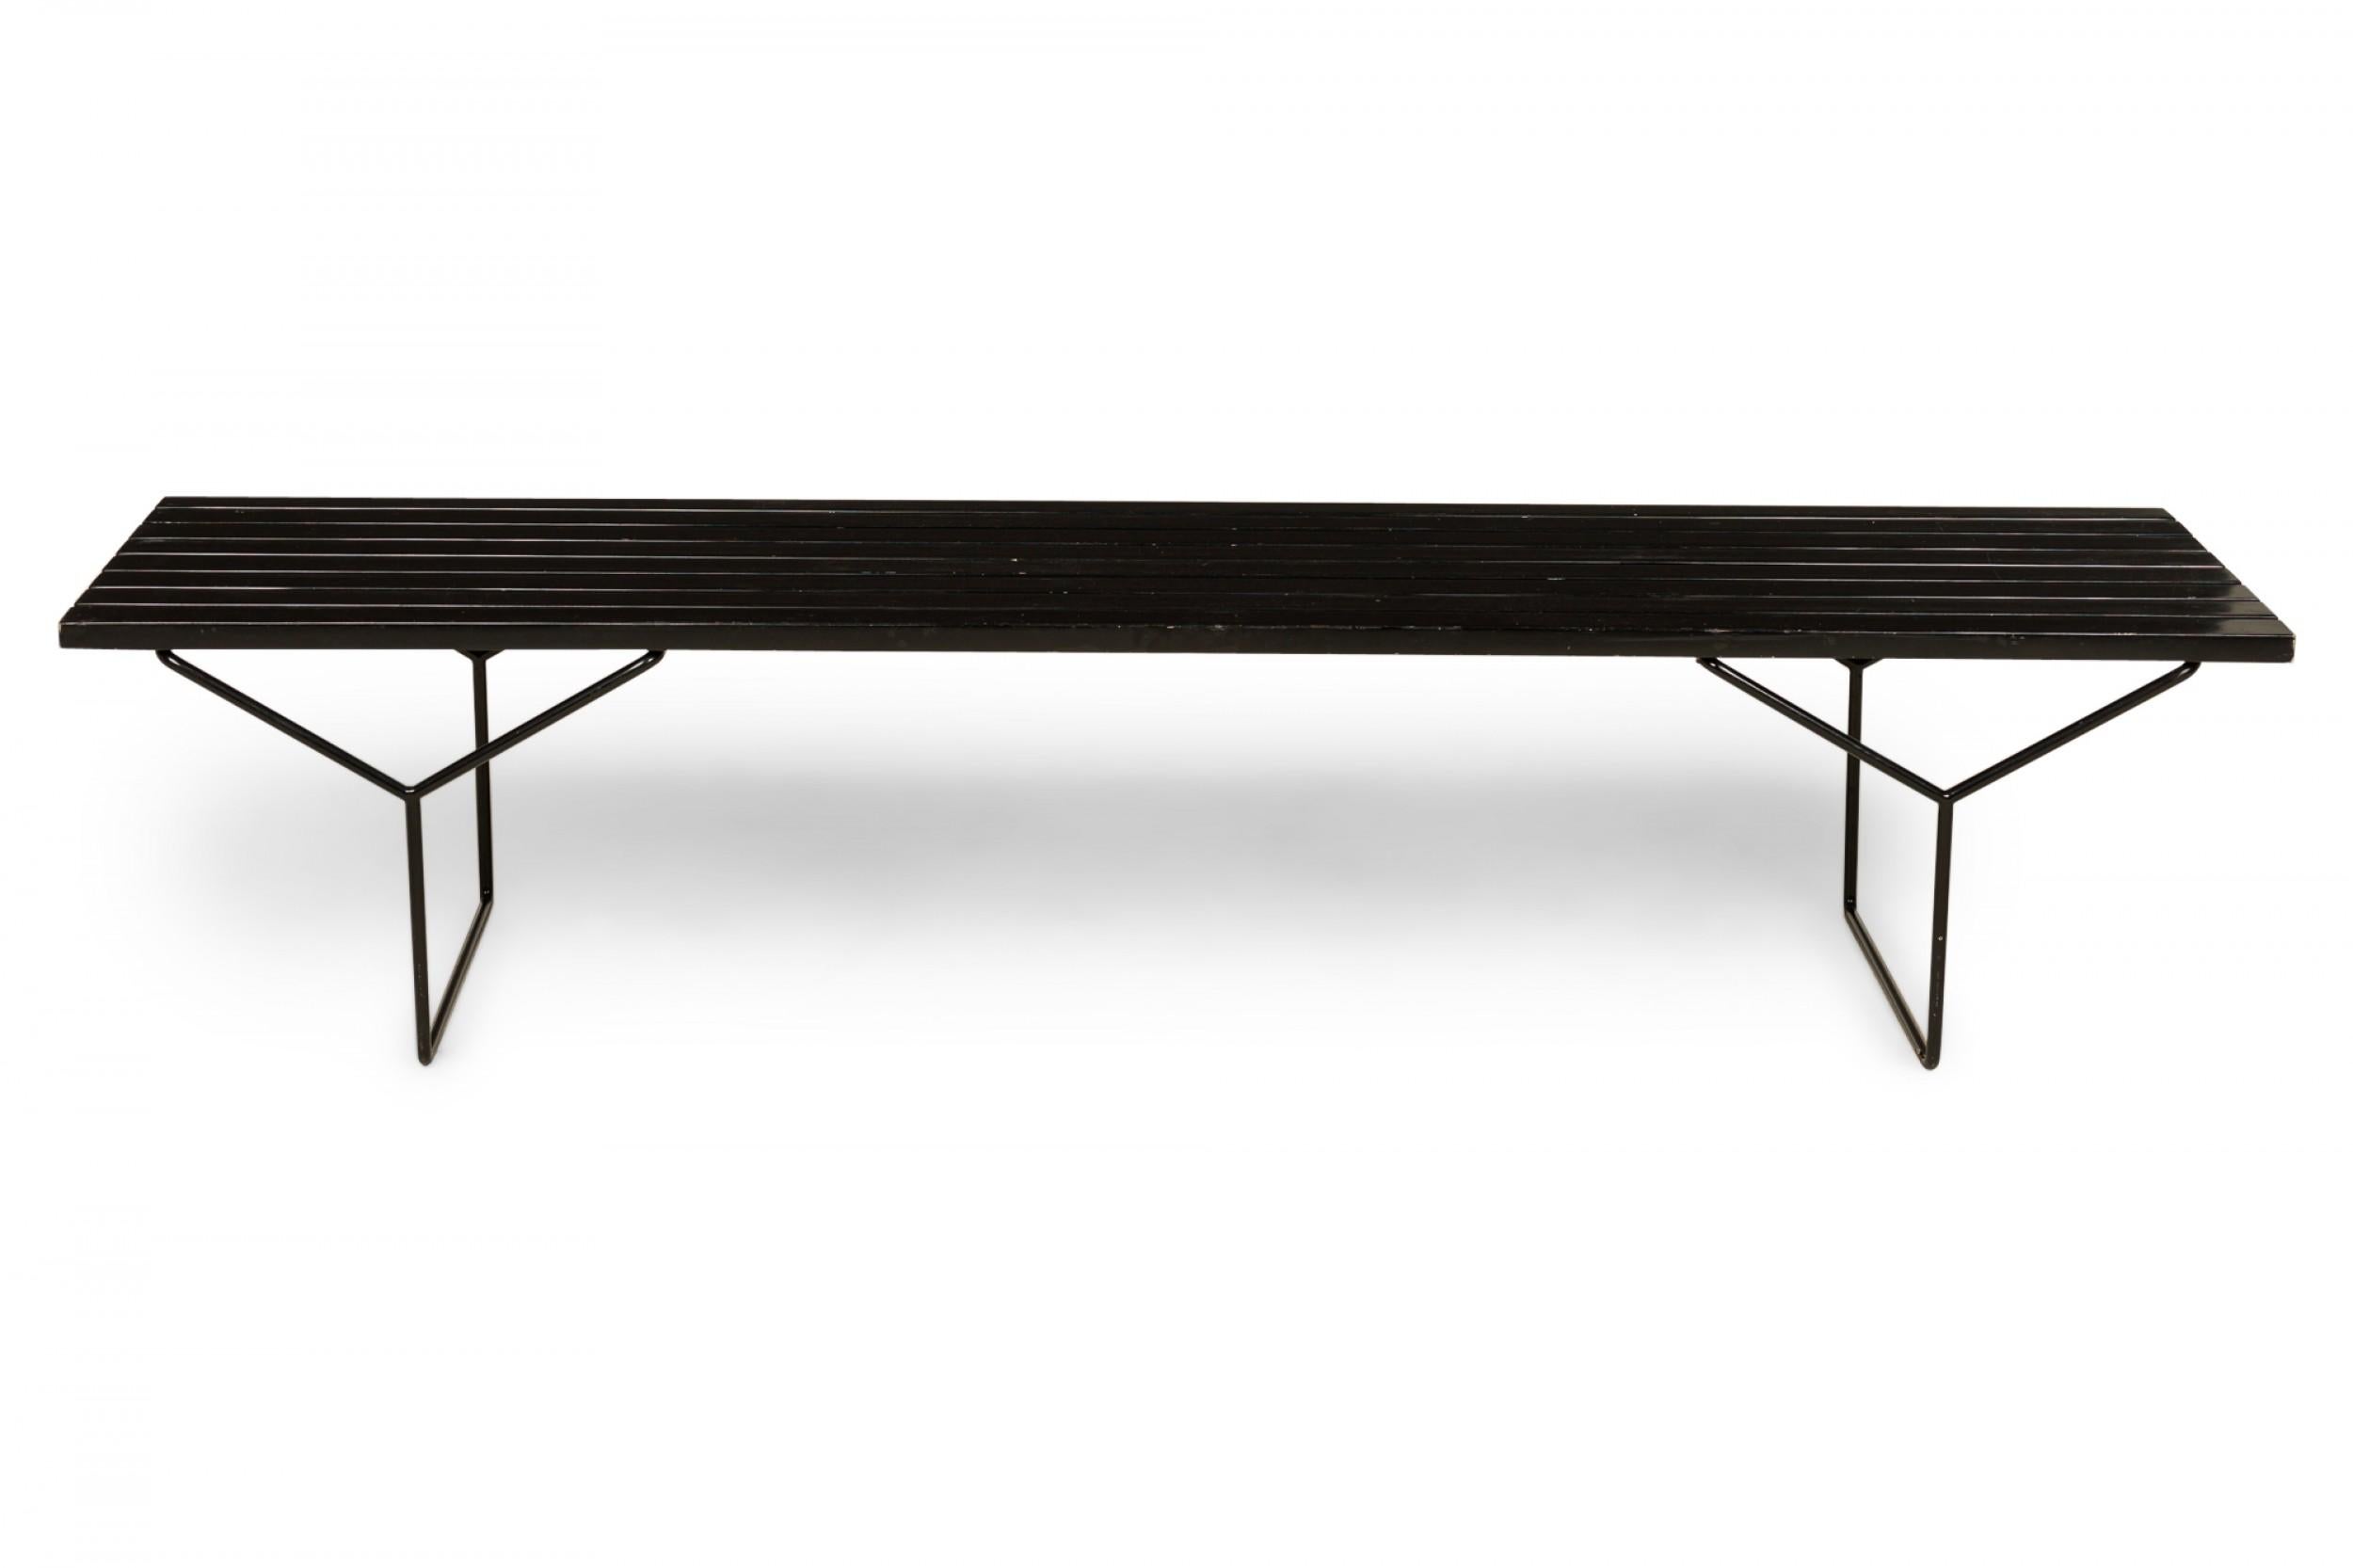 American Mid-Century rectangular bench with a black lacquered slat wood seat resting on two Y-shaped black iron legs. (HARRY BERTOIA FOR KNOLL ASSOCIATES).
 